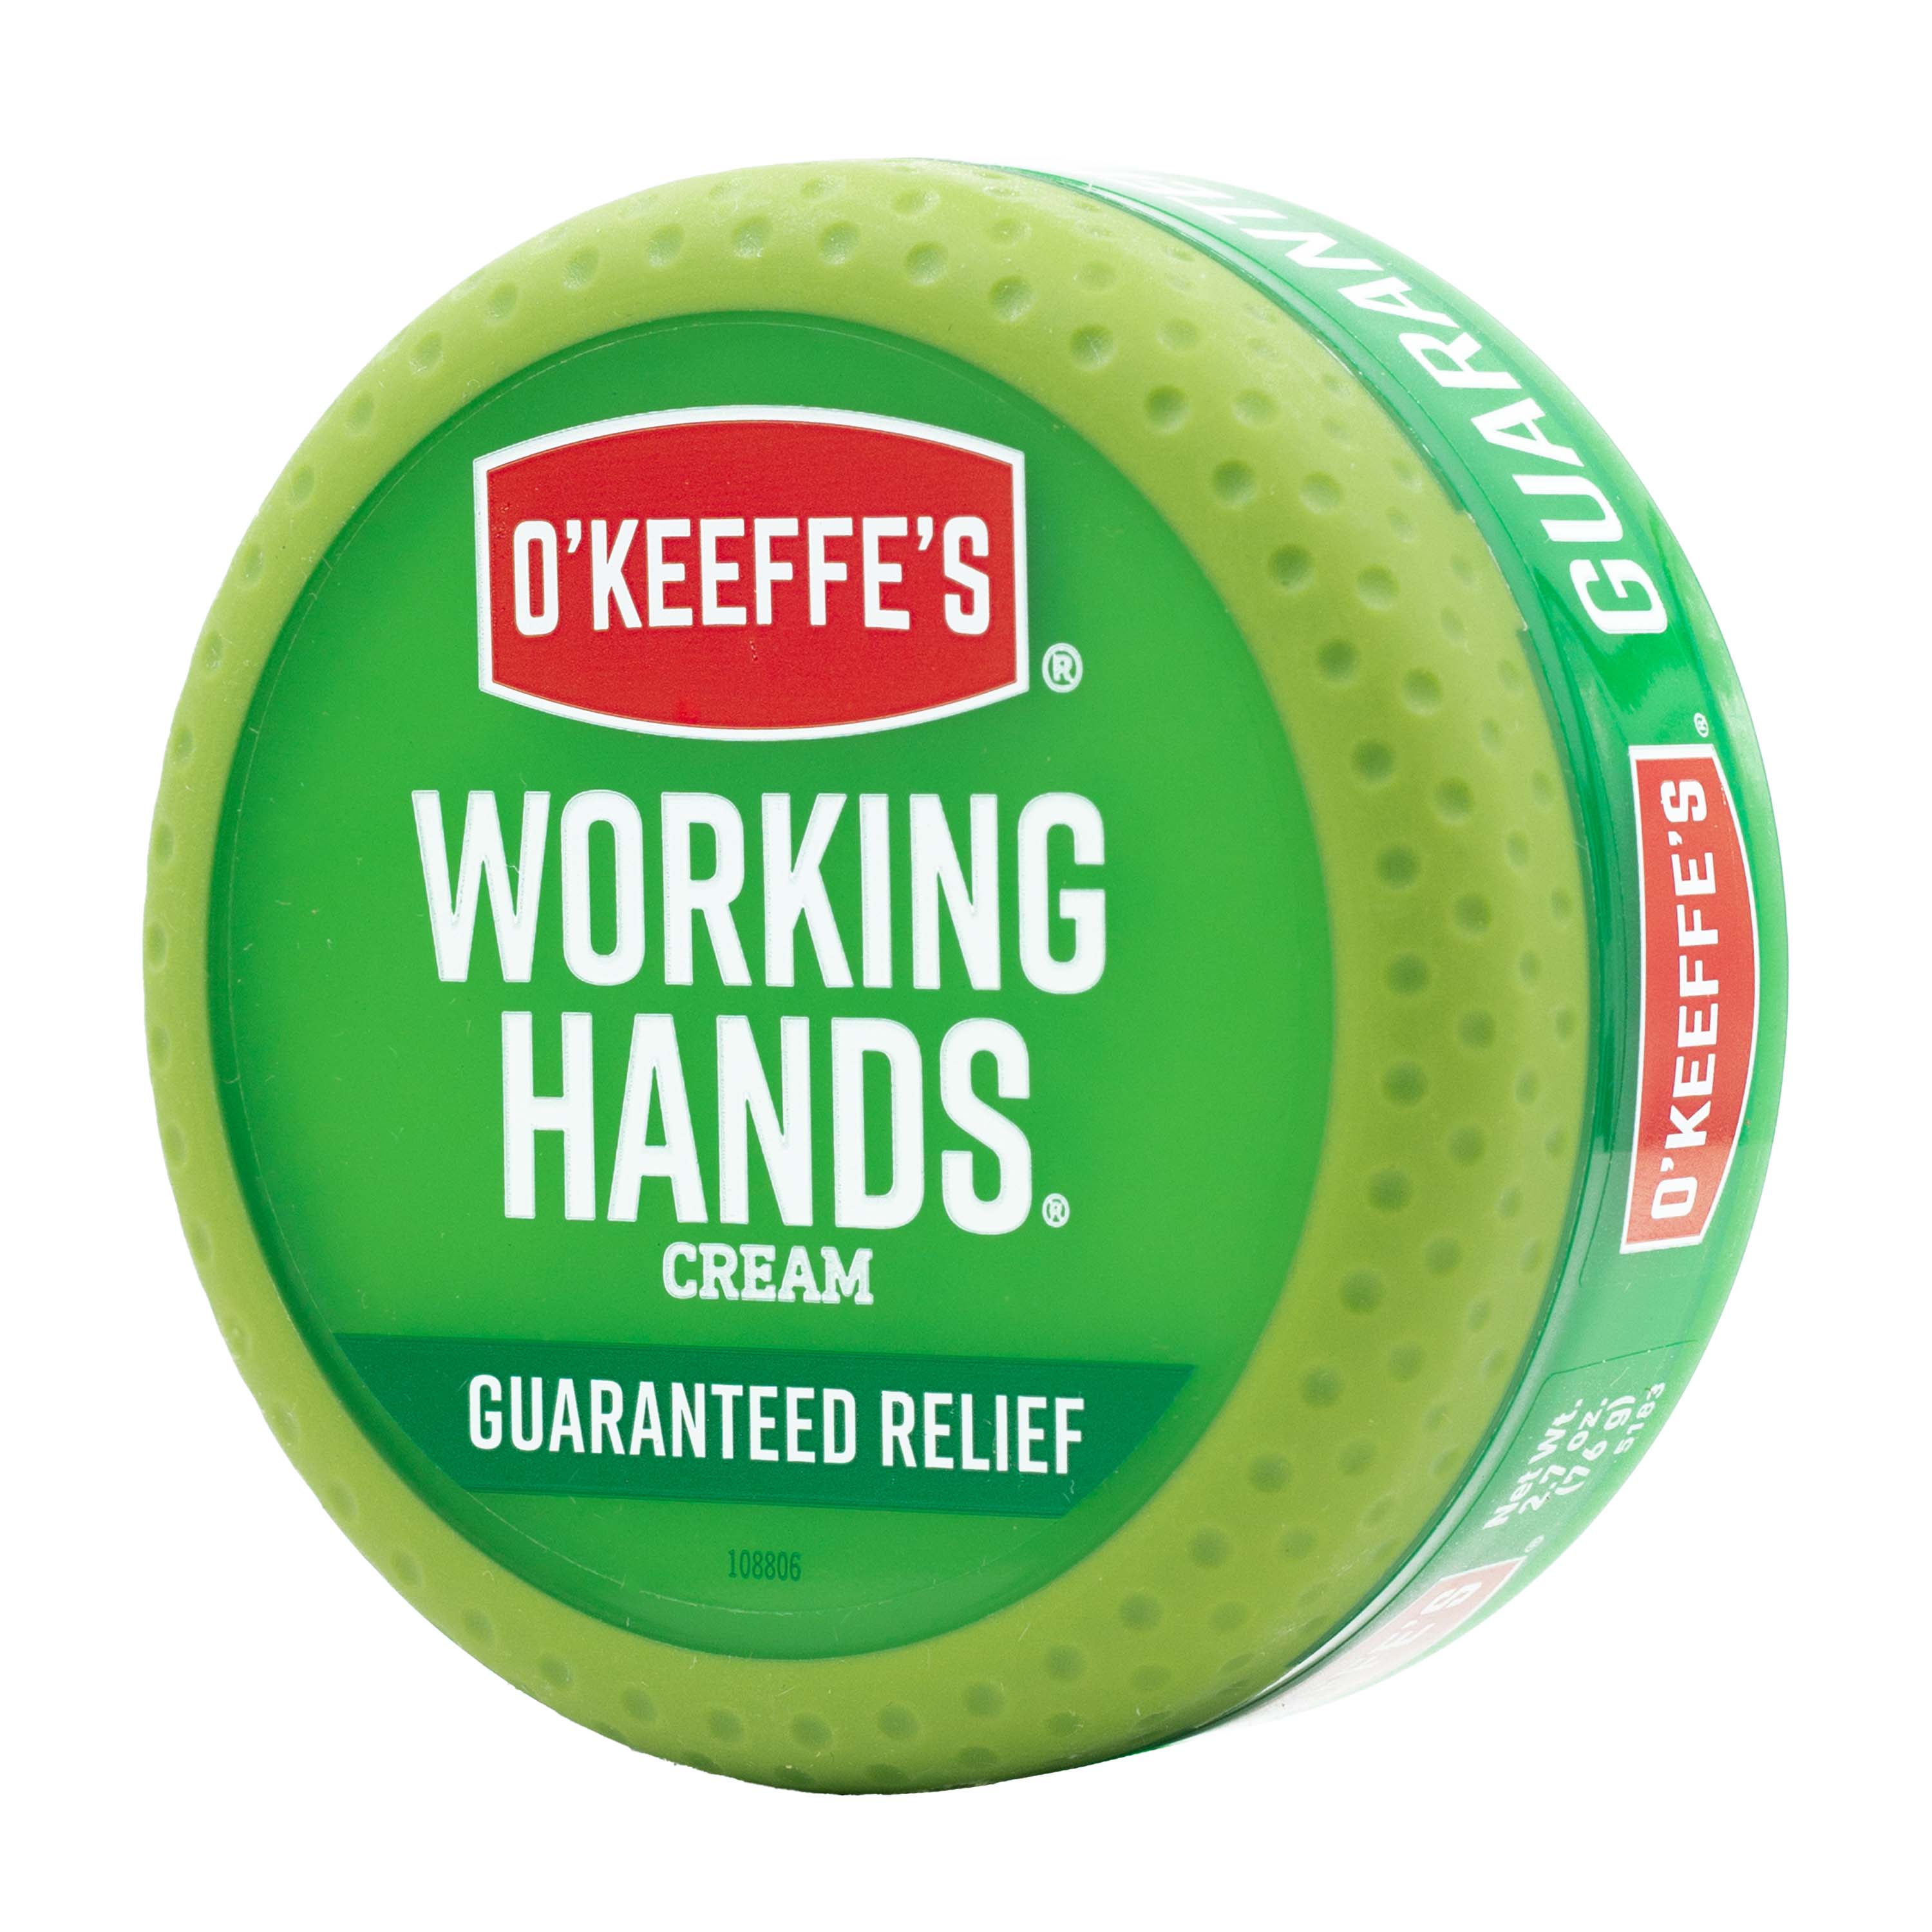 O'Keeffe's Working Hands Hand Cream for Extremely Dry, Cracked Hands, 3.4 Ounce Jar, (Pack 1) 1 - Pack Hand Cream